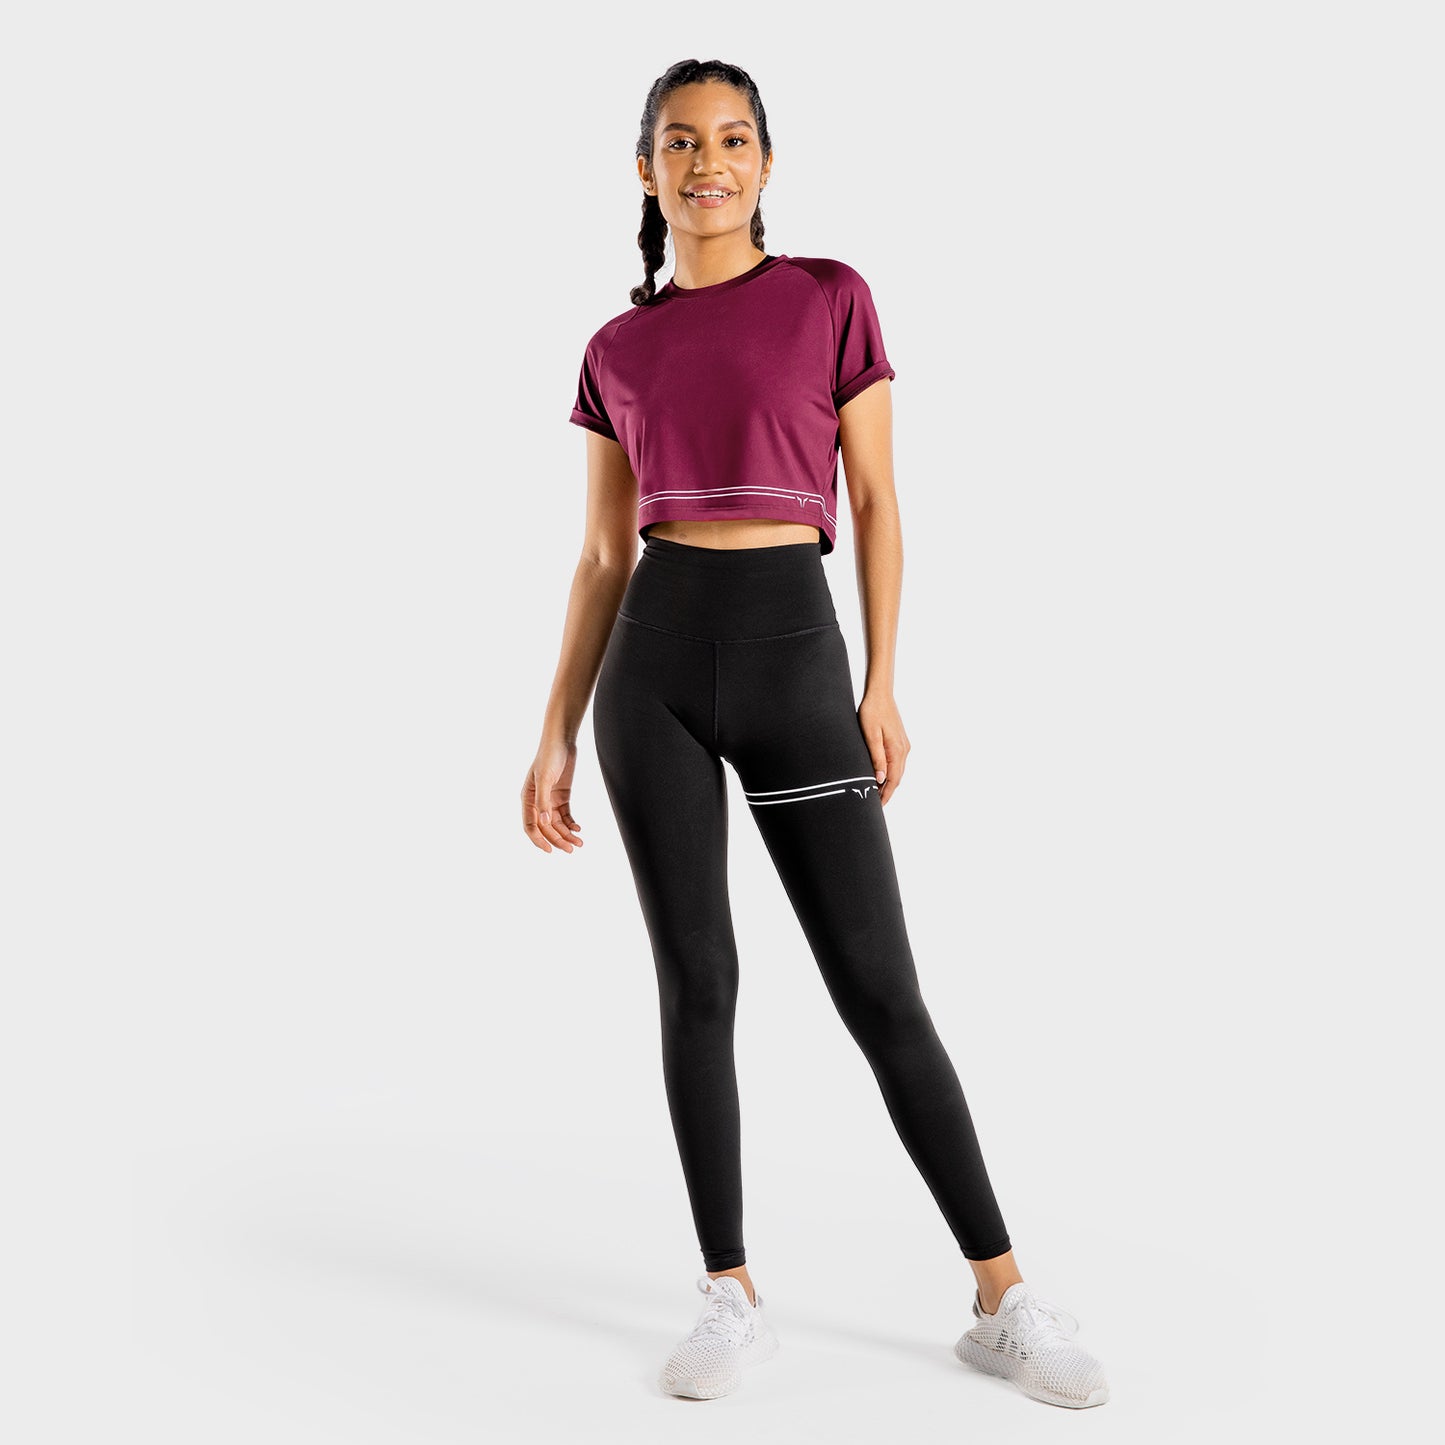 squatwolf-gym-t-shirts-for-women-flux-crop-tee-maroon-workout-clothes